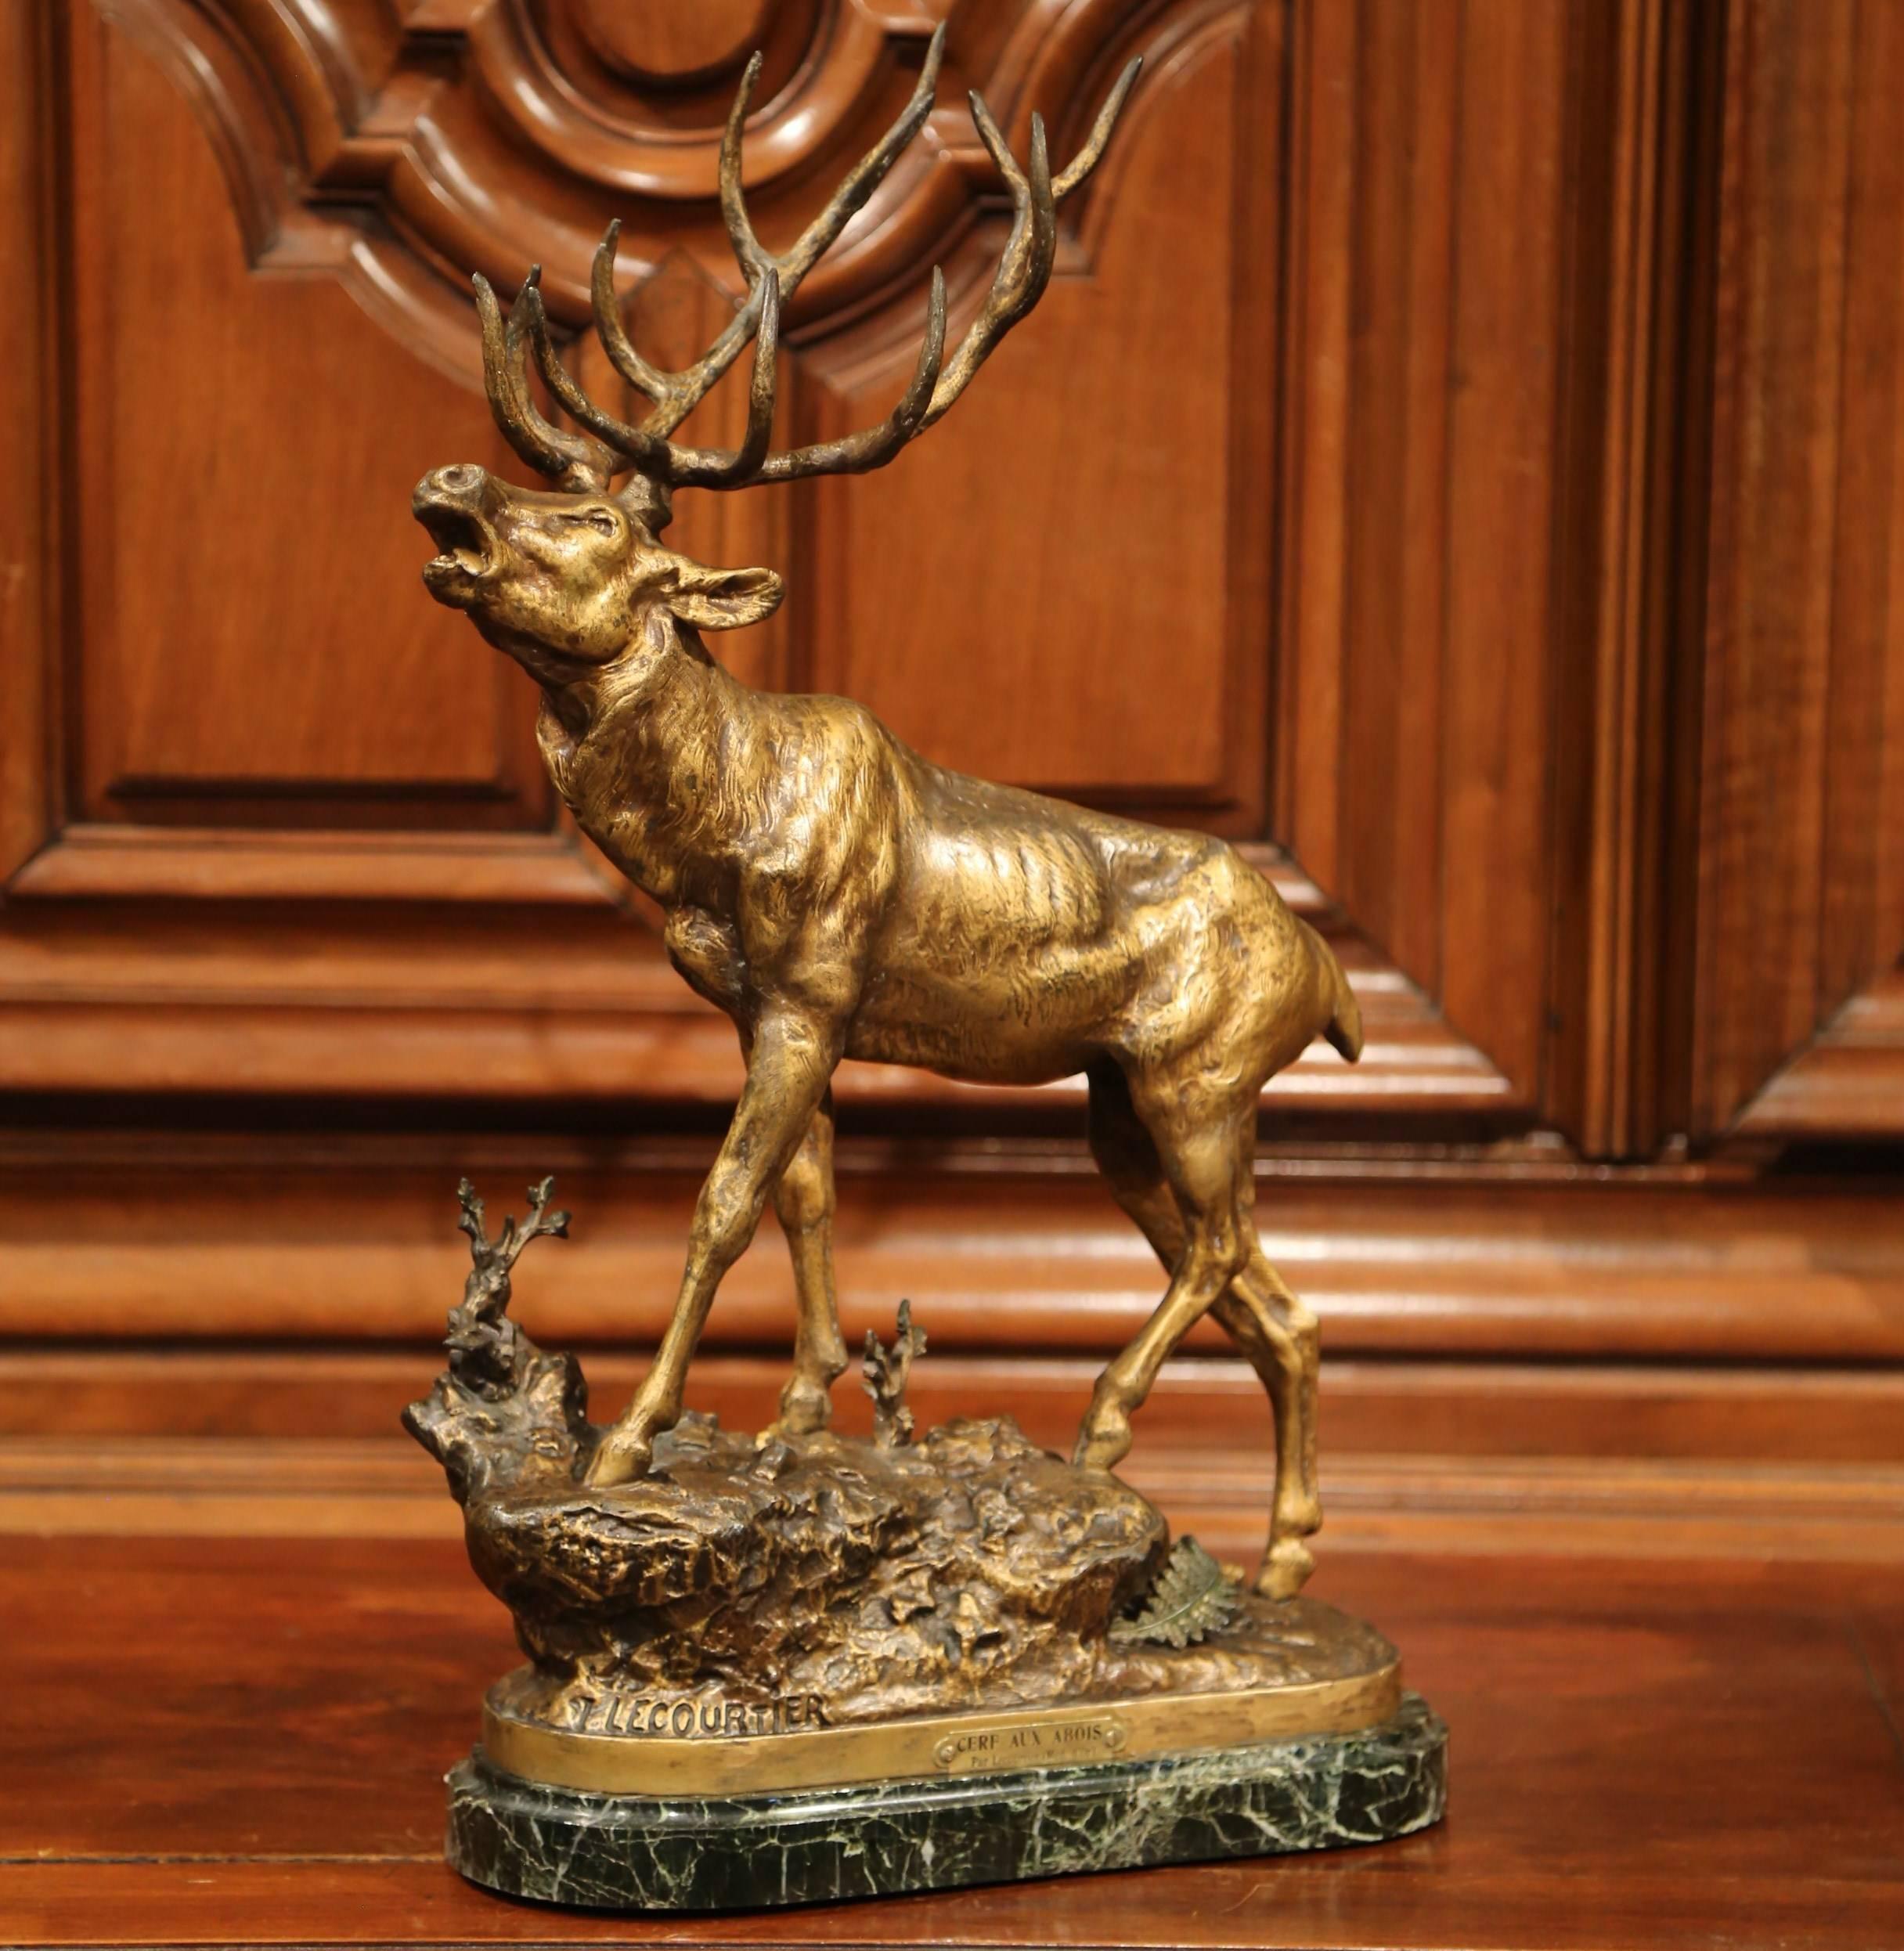 Hand-Carved 19th Century French Spelter Deer Sculpture on Marble Base Signed P. Lecourtier